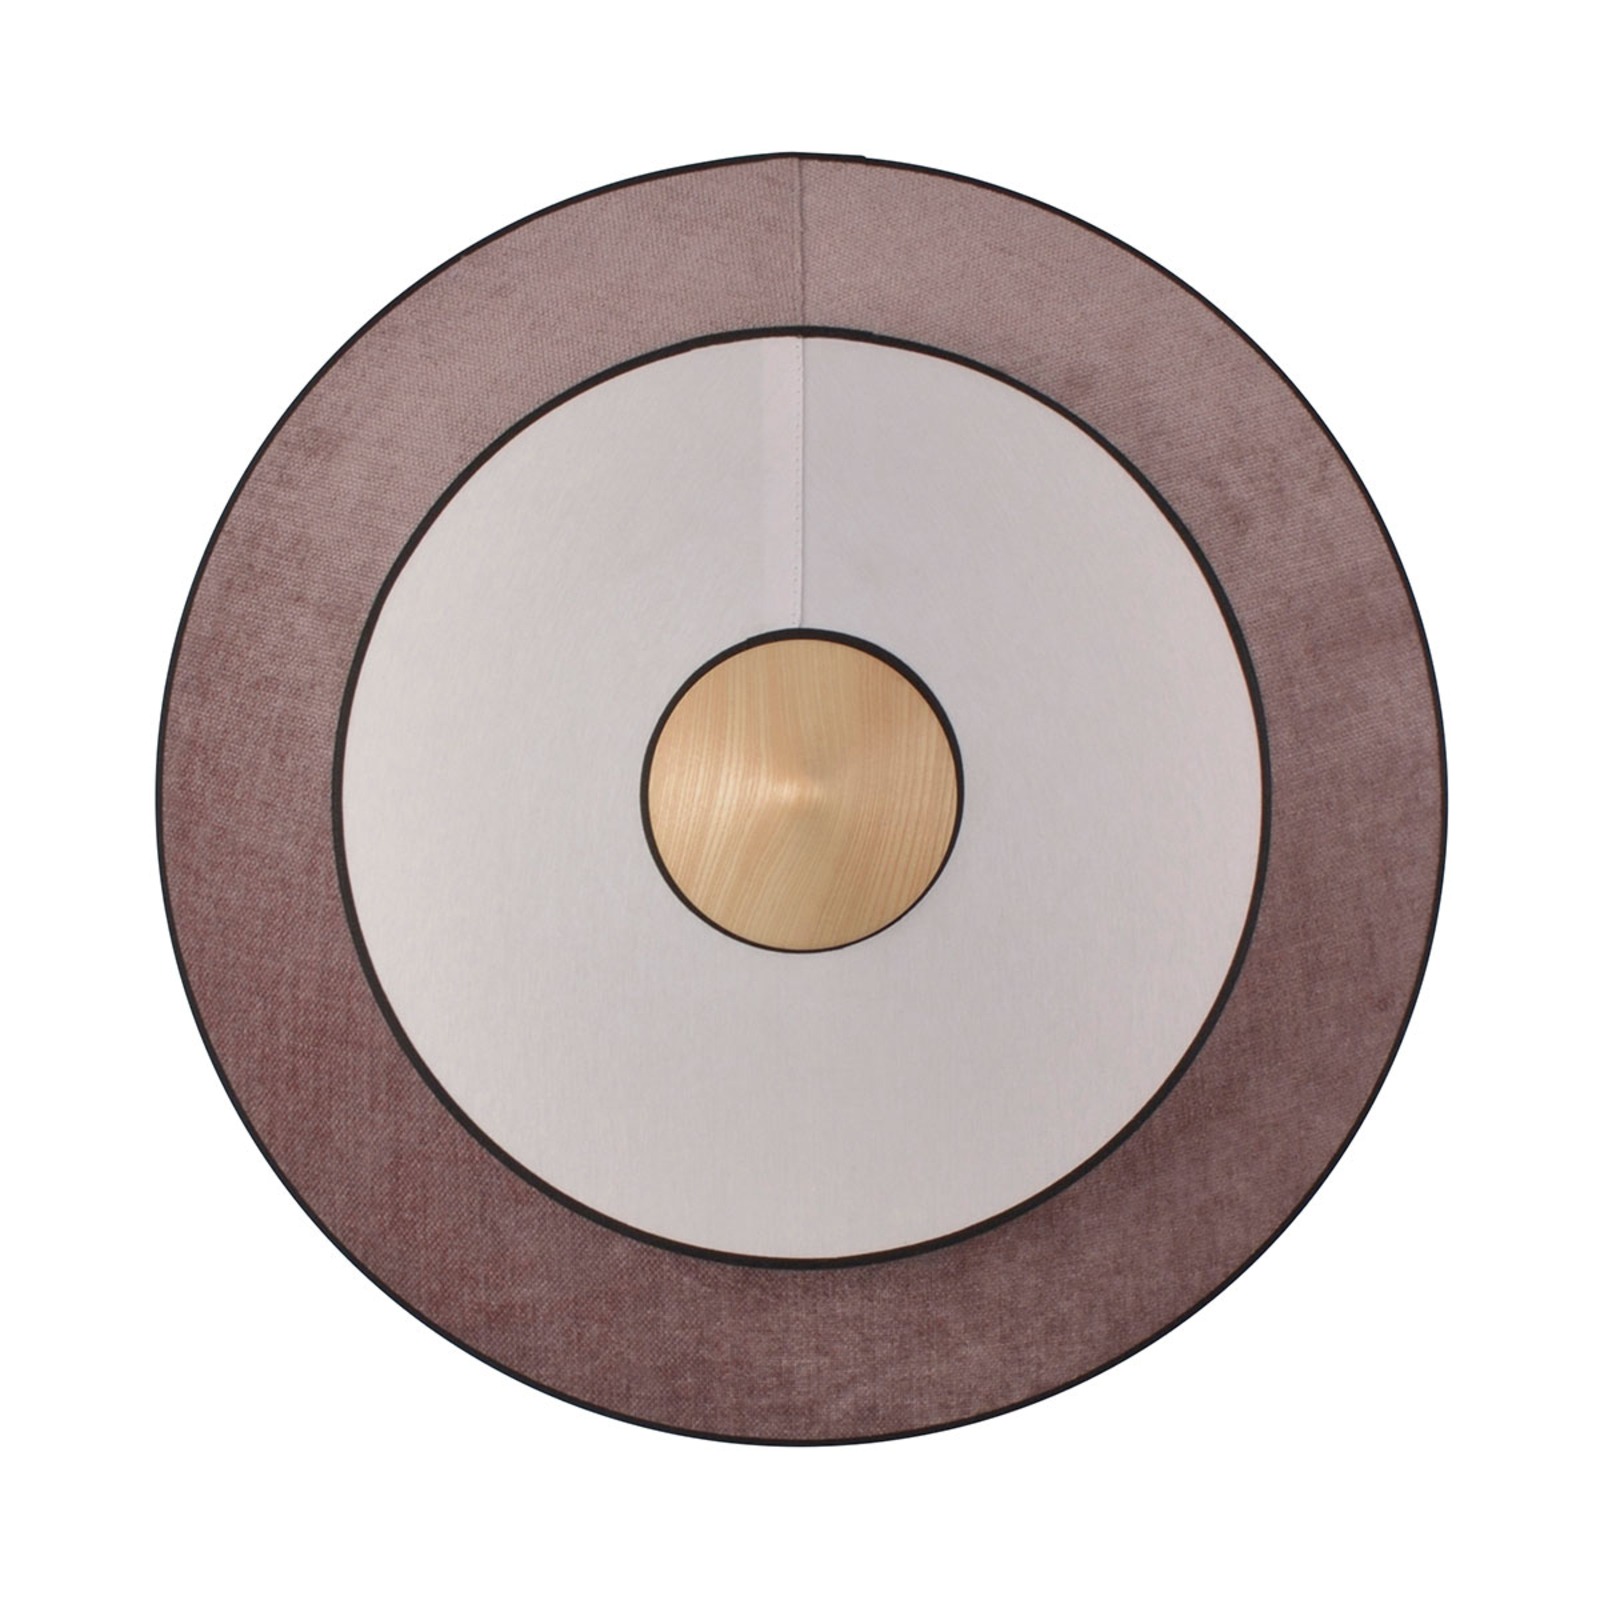 Forestier Cymbal S LED-væglampe, pudderrosa